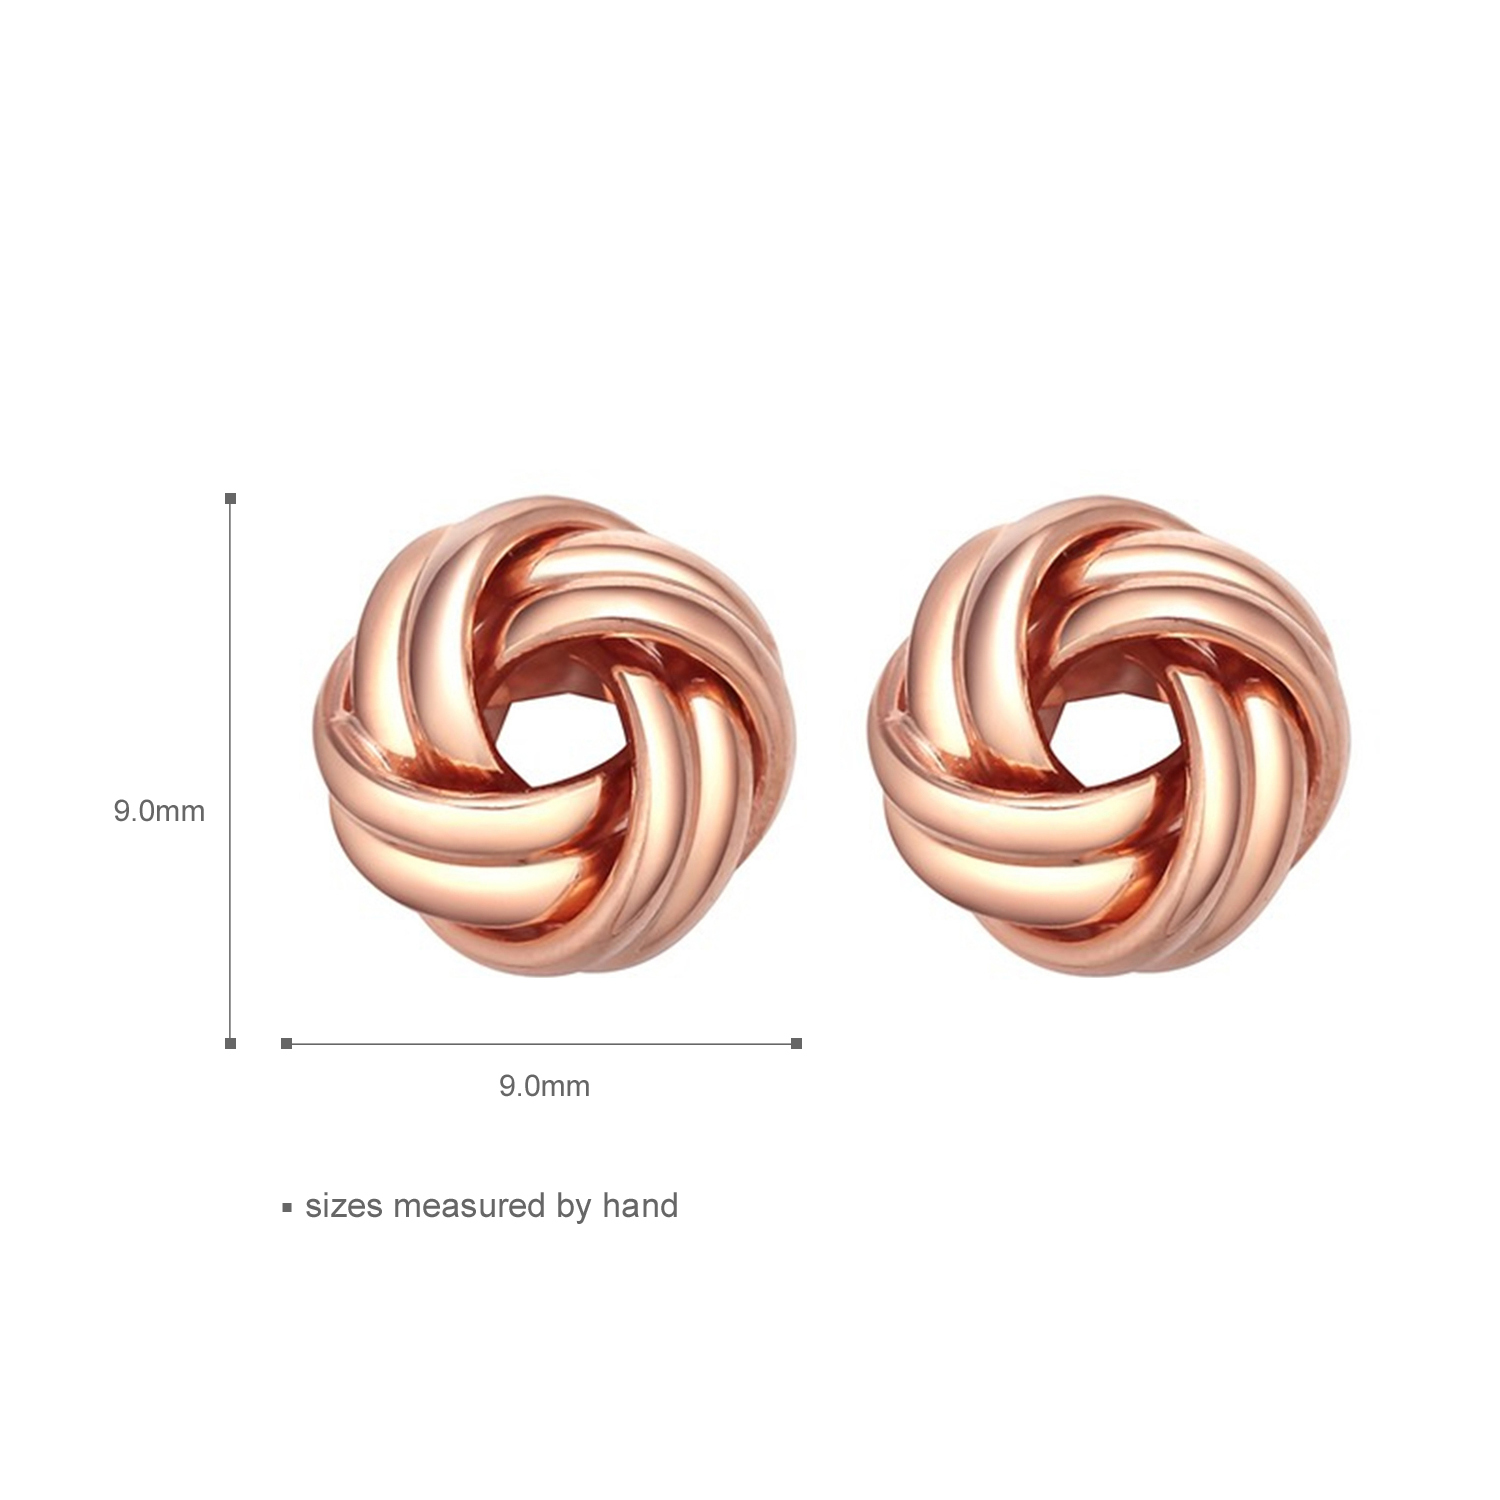 Best Selling Minimalism Earring 925 Sterling Silver Rose Gold Plated Women Gift Earring Stud Jewelry(图4)